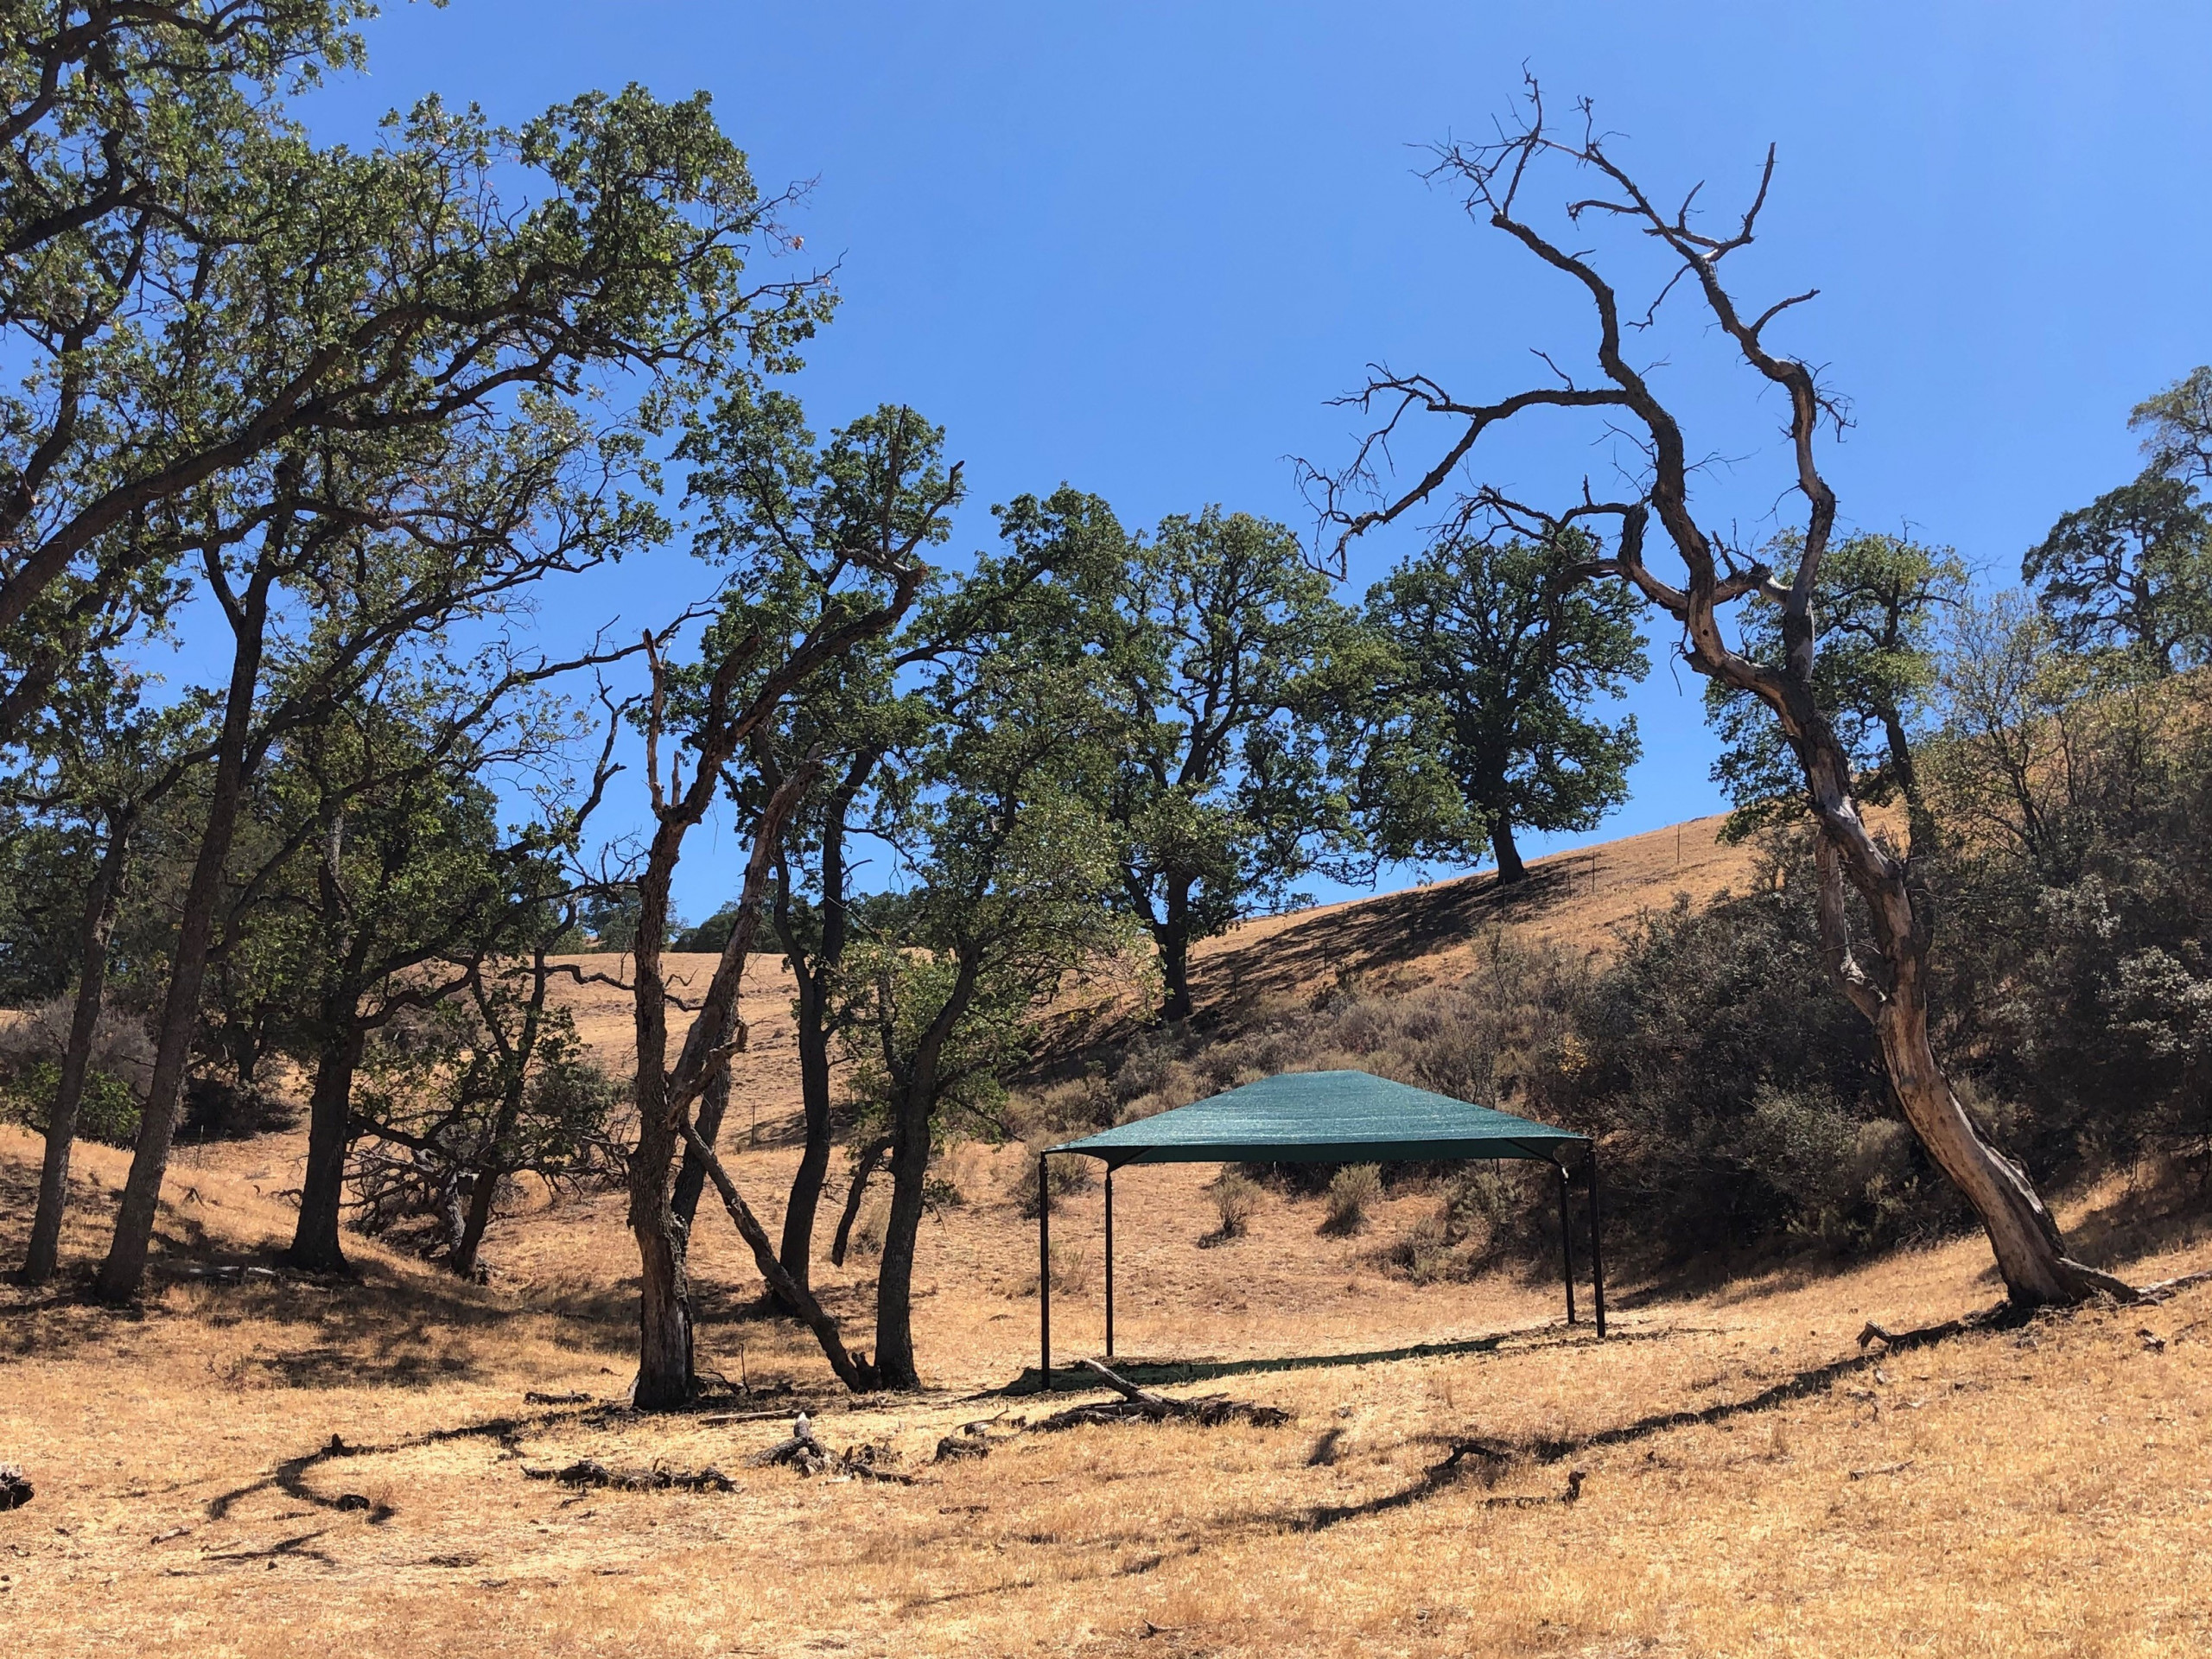 Shade tent standing in center of natural amphitheater at Mangini Ranch